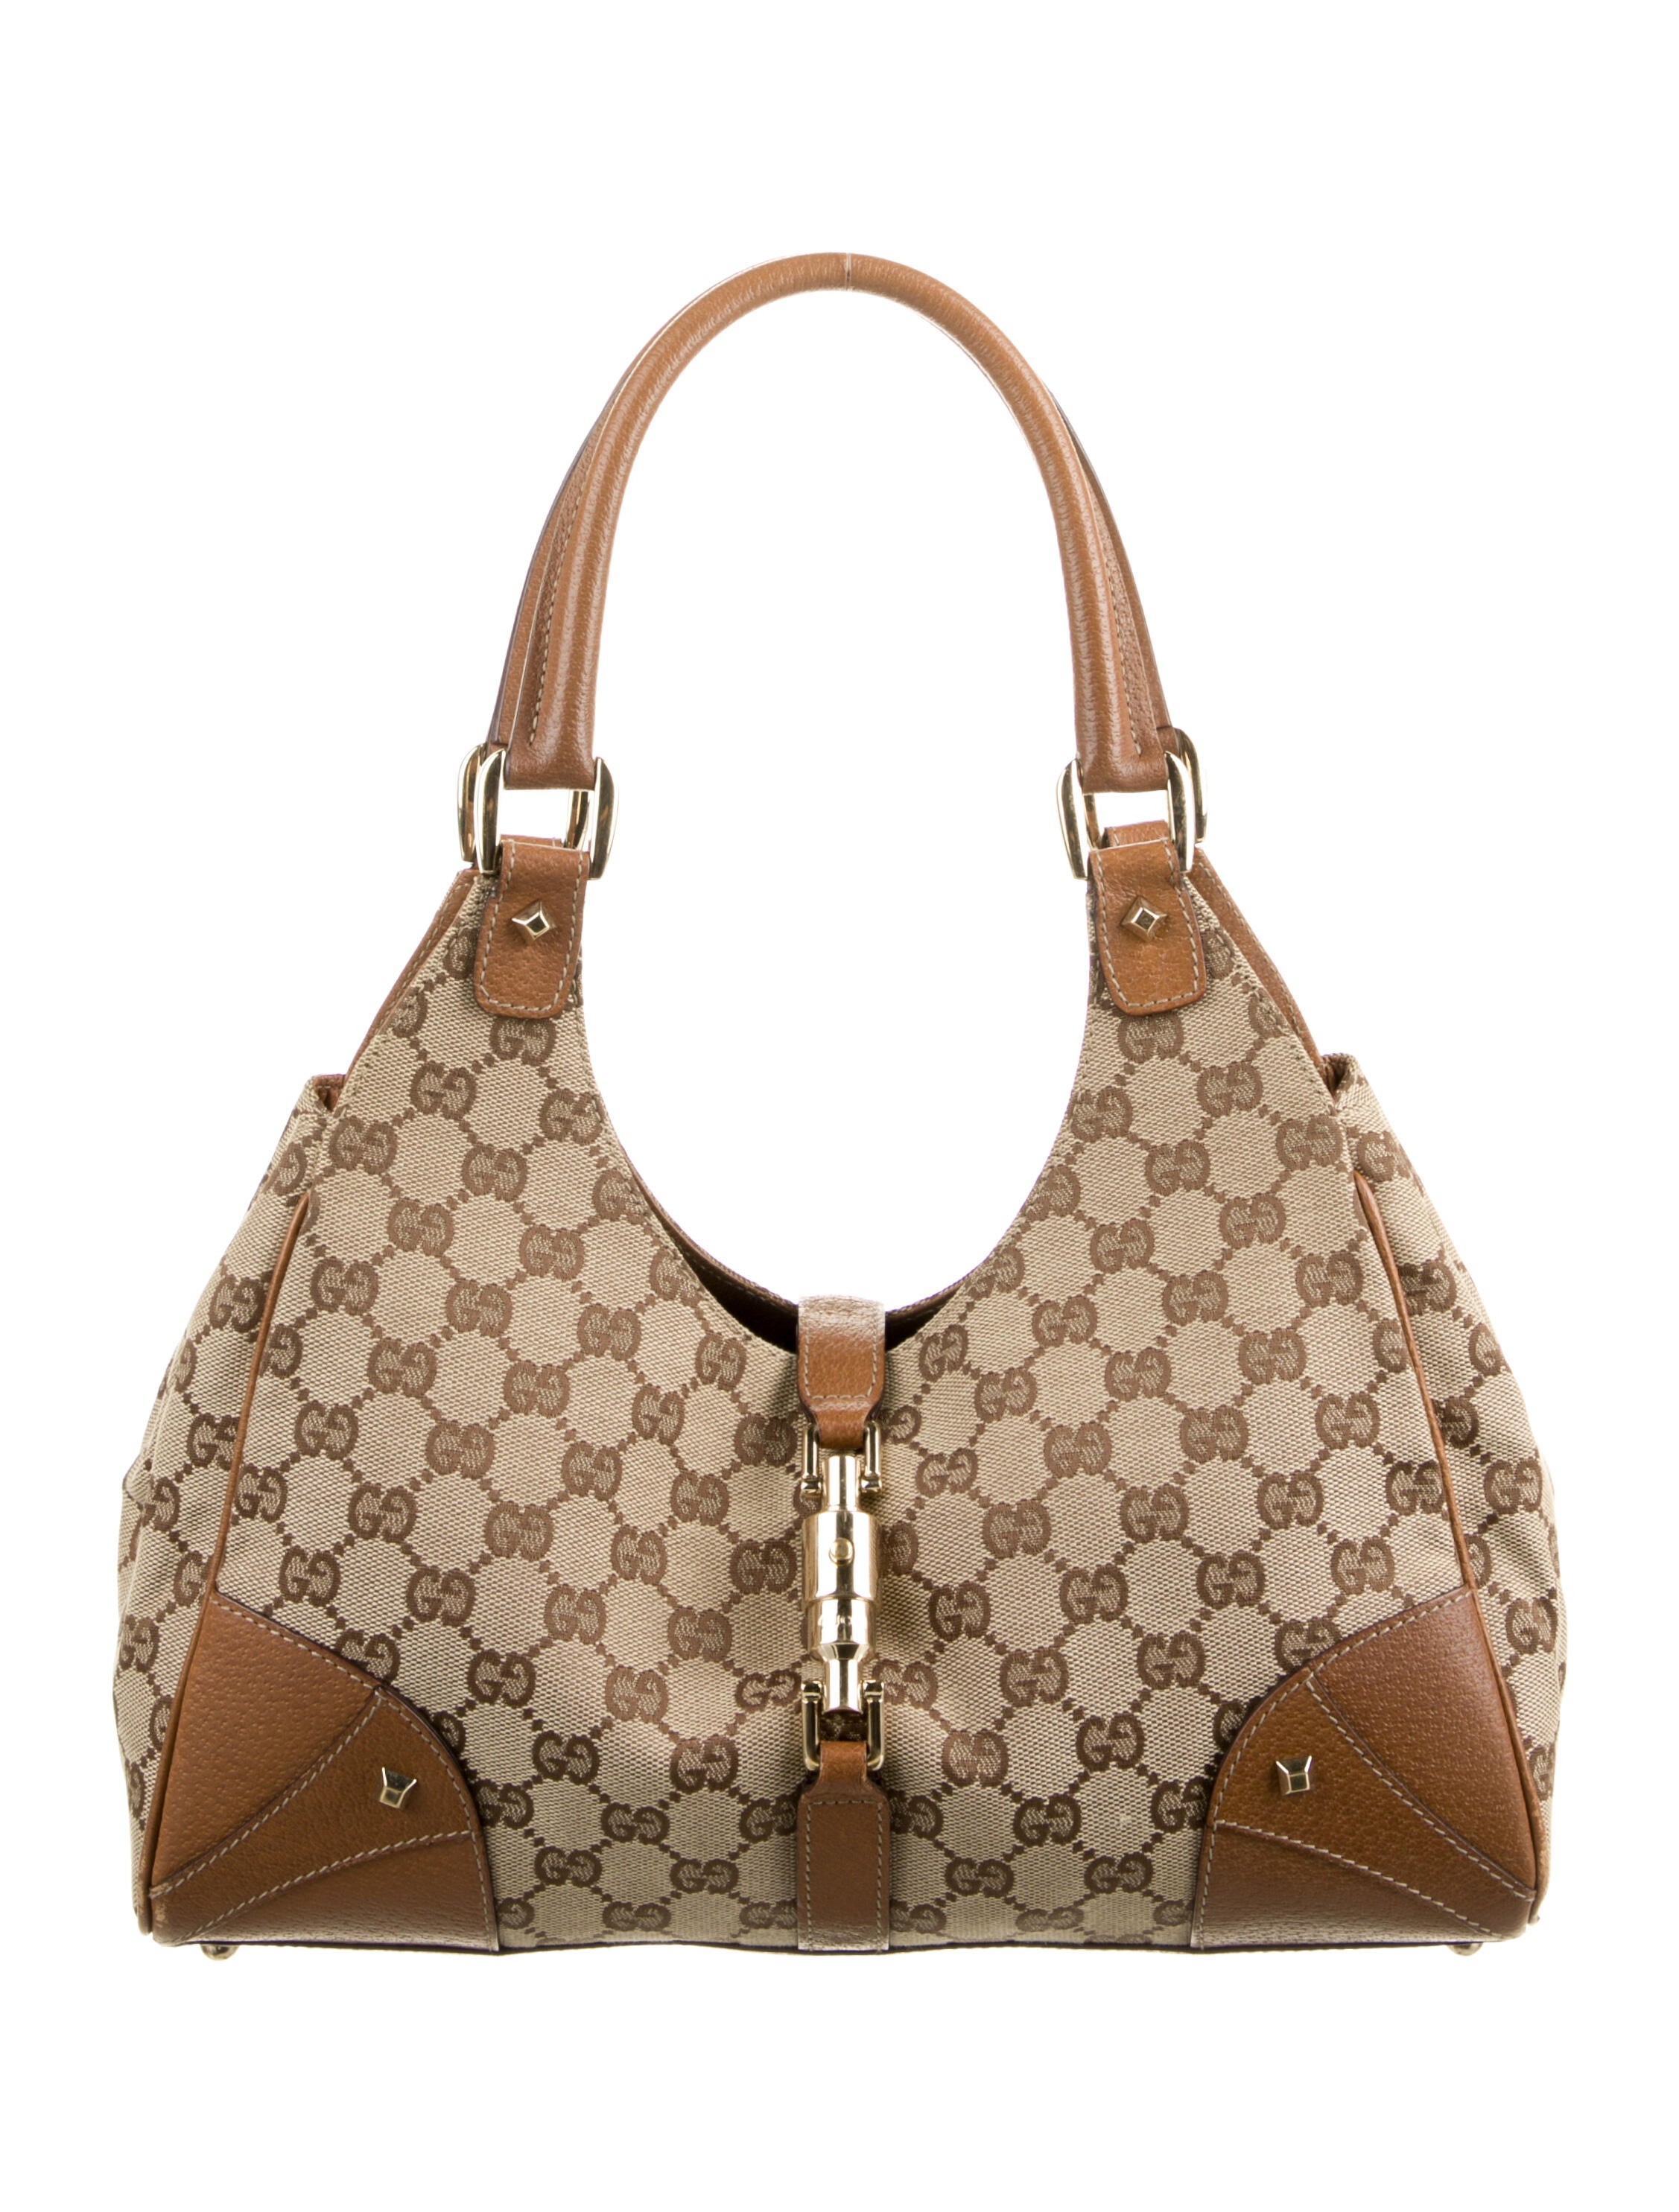 LUXURY BAGS UNDER $600/£600  LUXURY BAG COLLECTION 